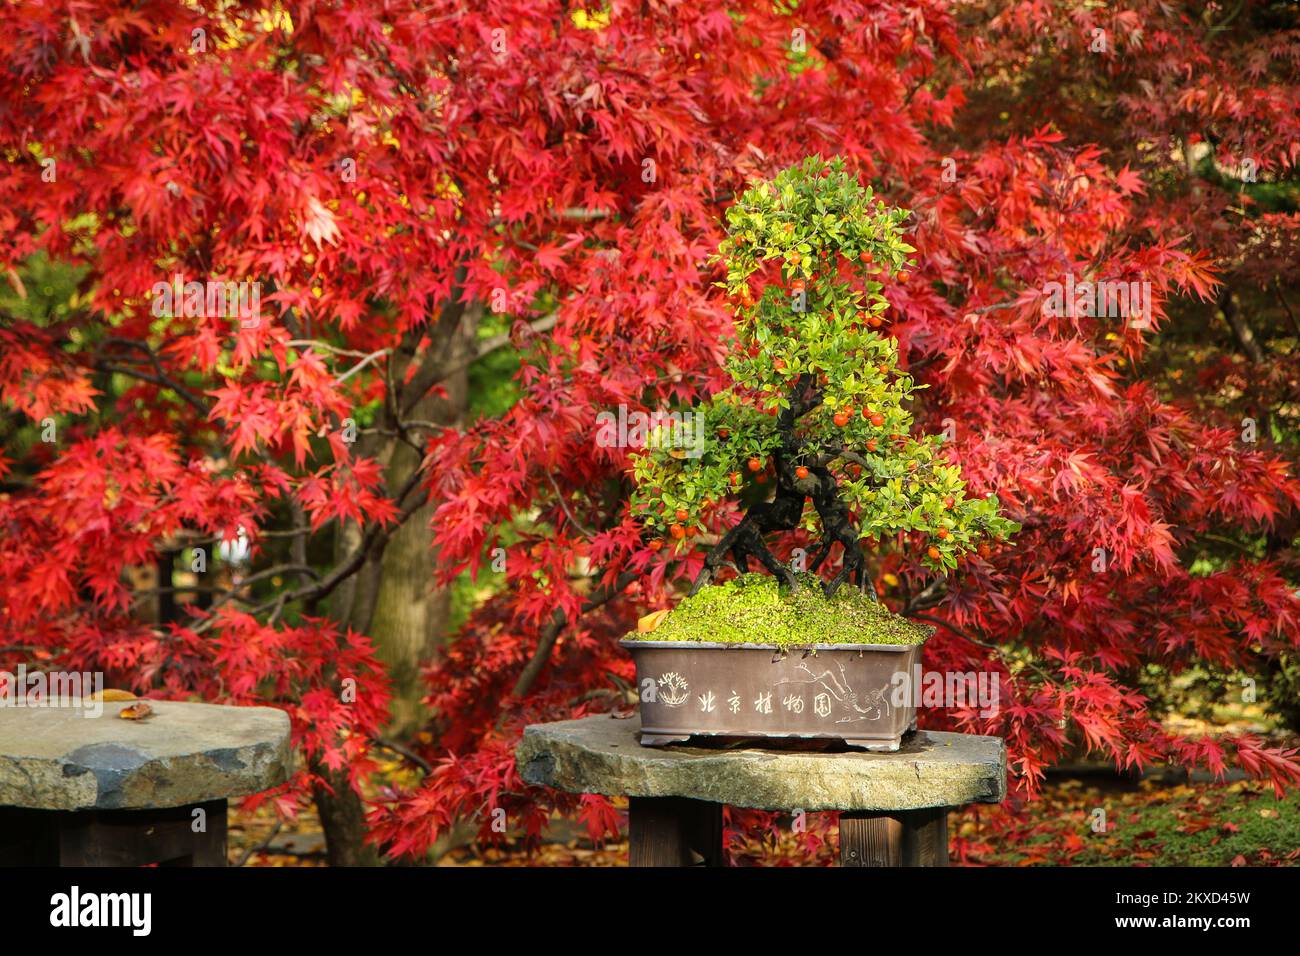 The green bonsai standing in the garden against the red leaves of a tree. The nice autumn contrast of the foliage. Stock Photo